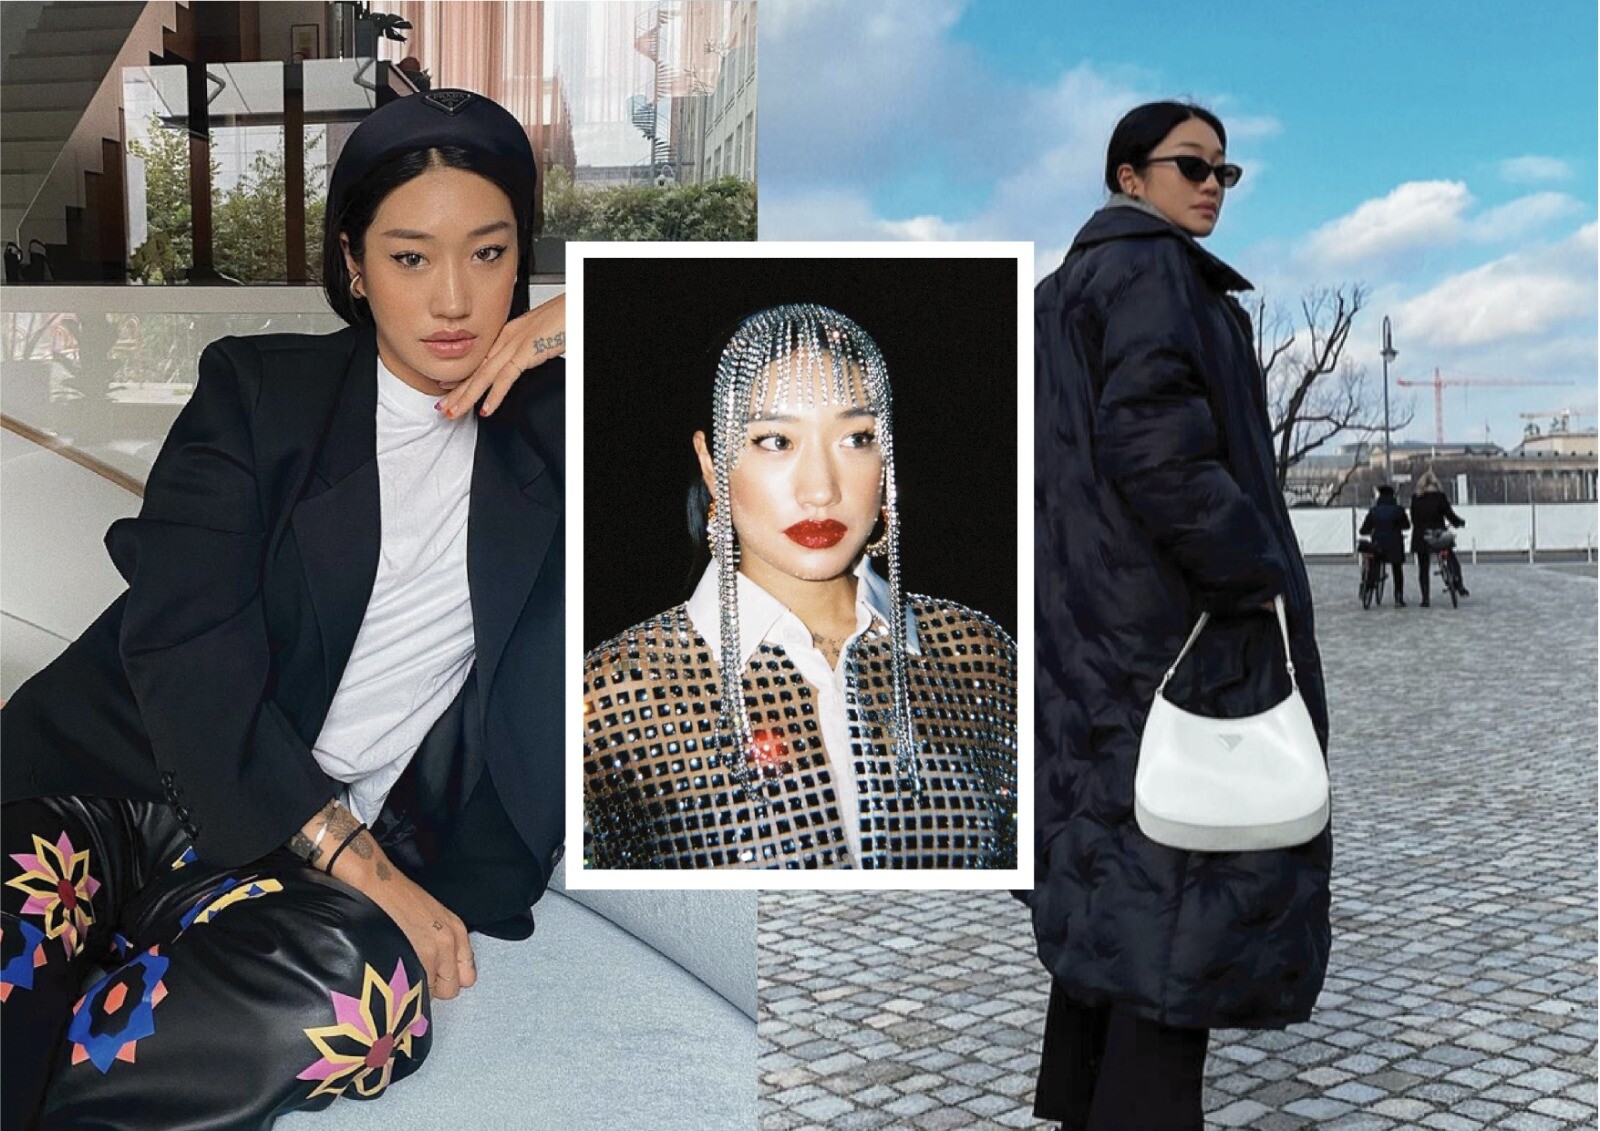 Get The Look: Peggy Gou Outfits To Copy For Every Occasion - Voir Fashion